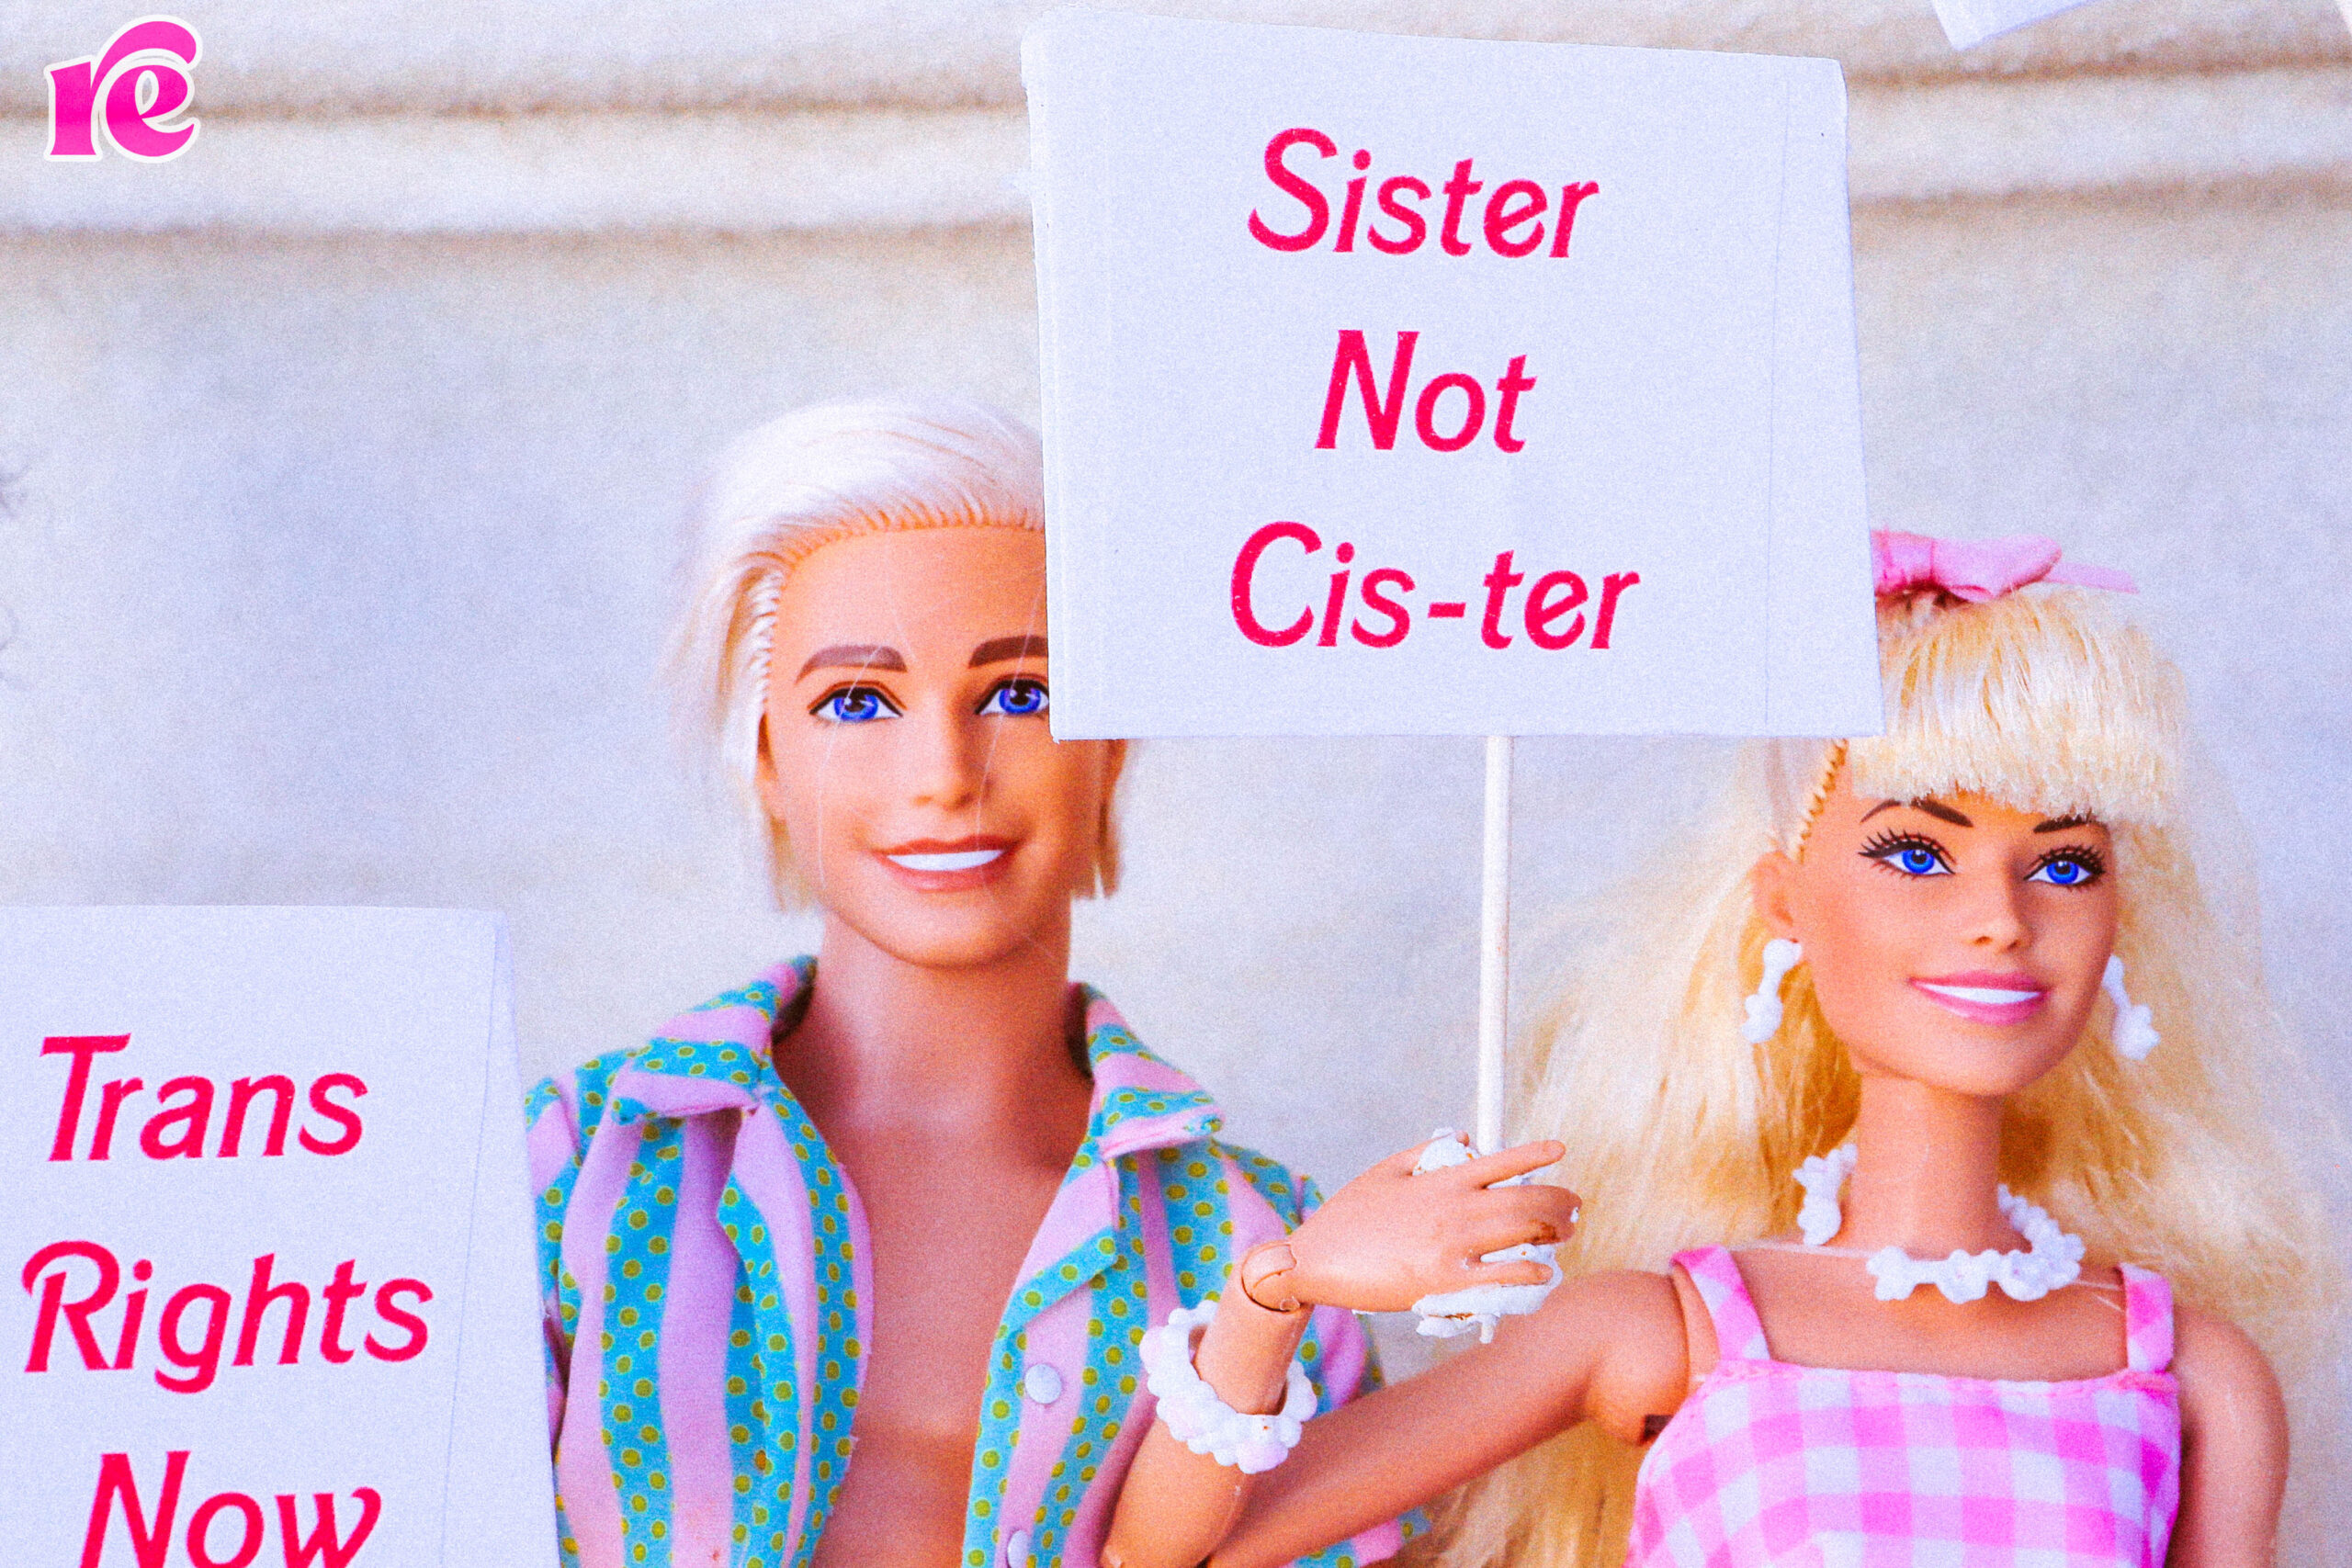 Barbie signs that say Sister not Cis-ter